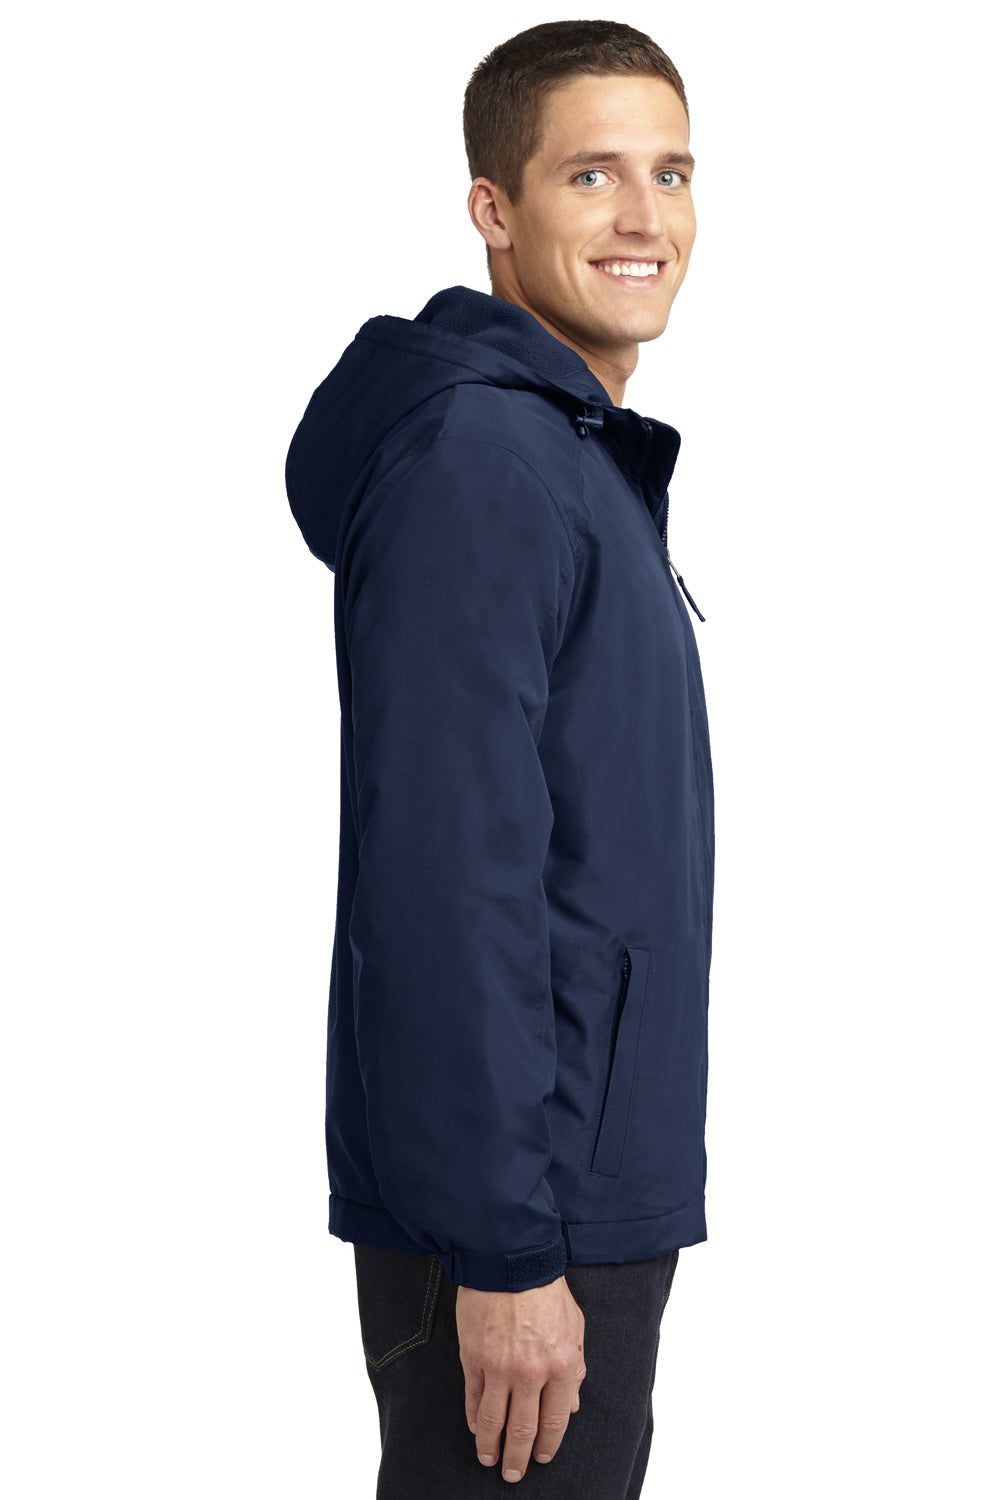 Port Authority J327 Mens Charger Wind & Water Resistant Full Zip Hooded Jacket Navy Blue Side